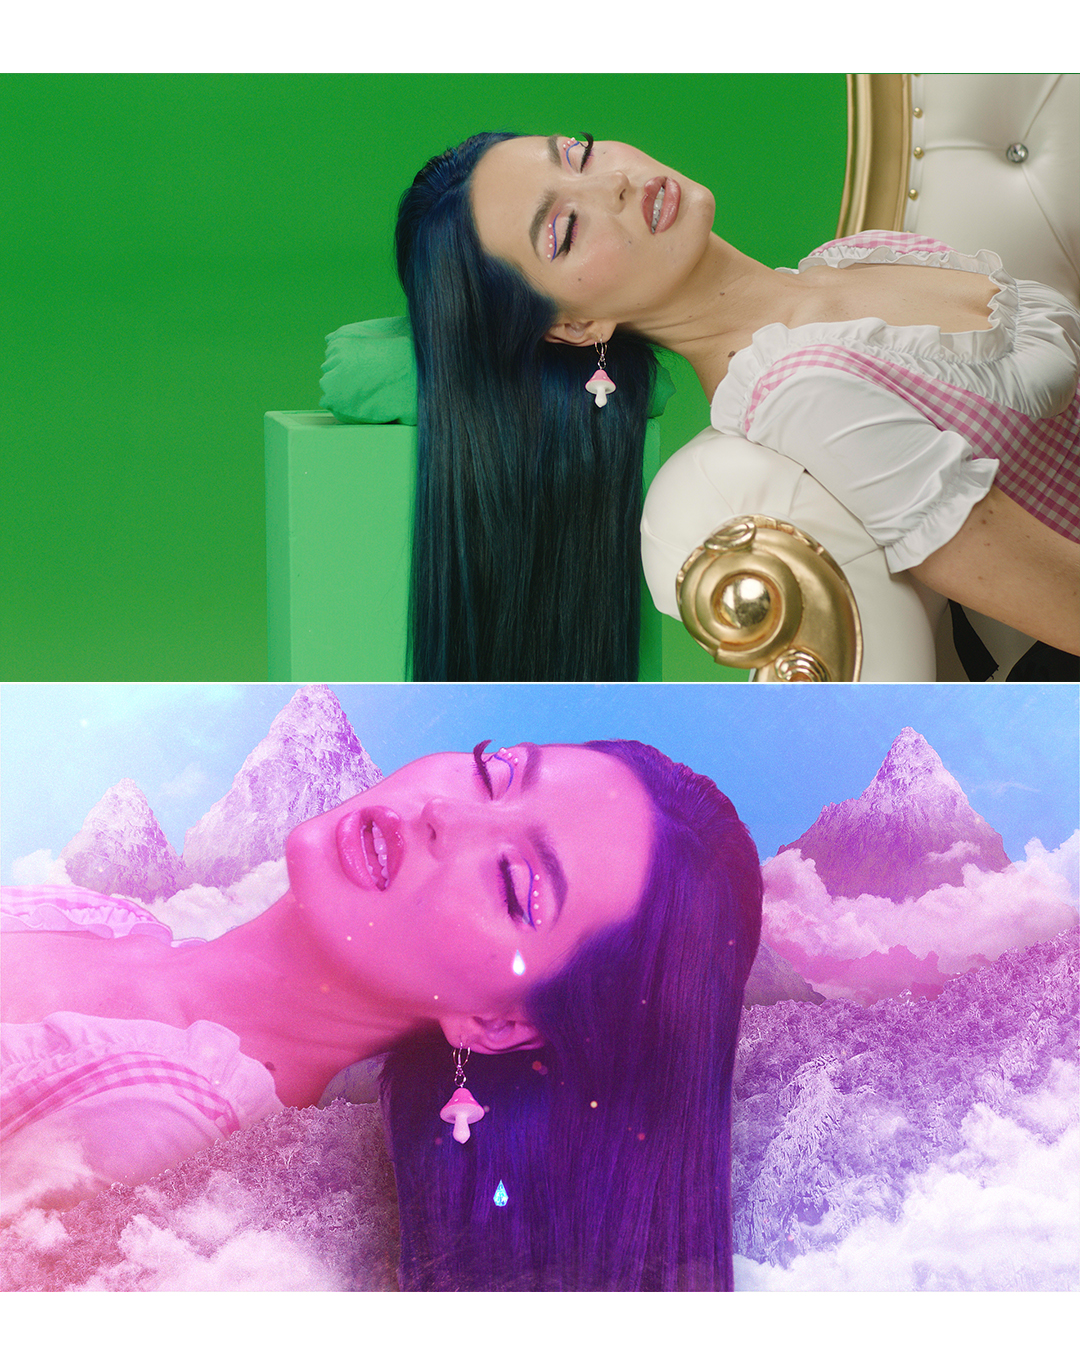 greenscreen comparison before and after VFX